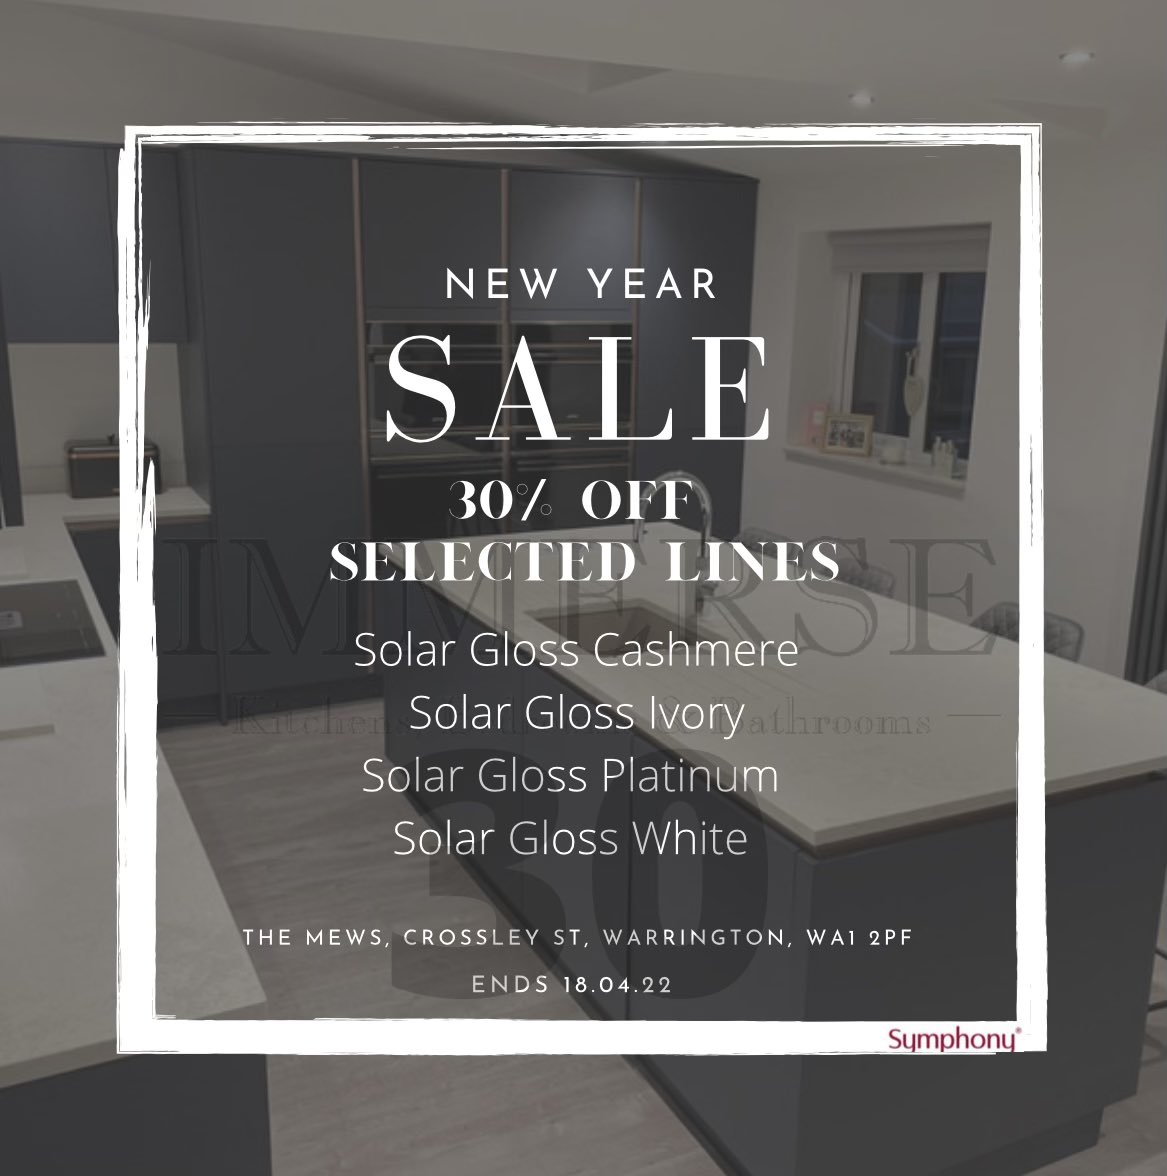 @Immersekbb kitchen and fitted bedroom furniture New Year sale now live. Come get your new dream kitchen and bedroom designed exactly how you’d like. 😊